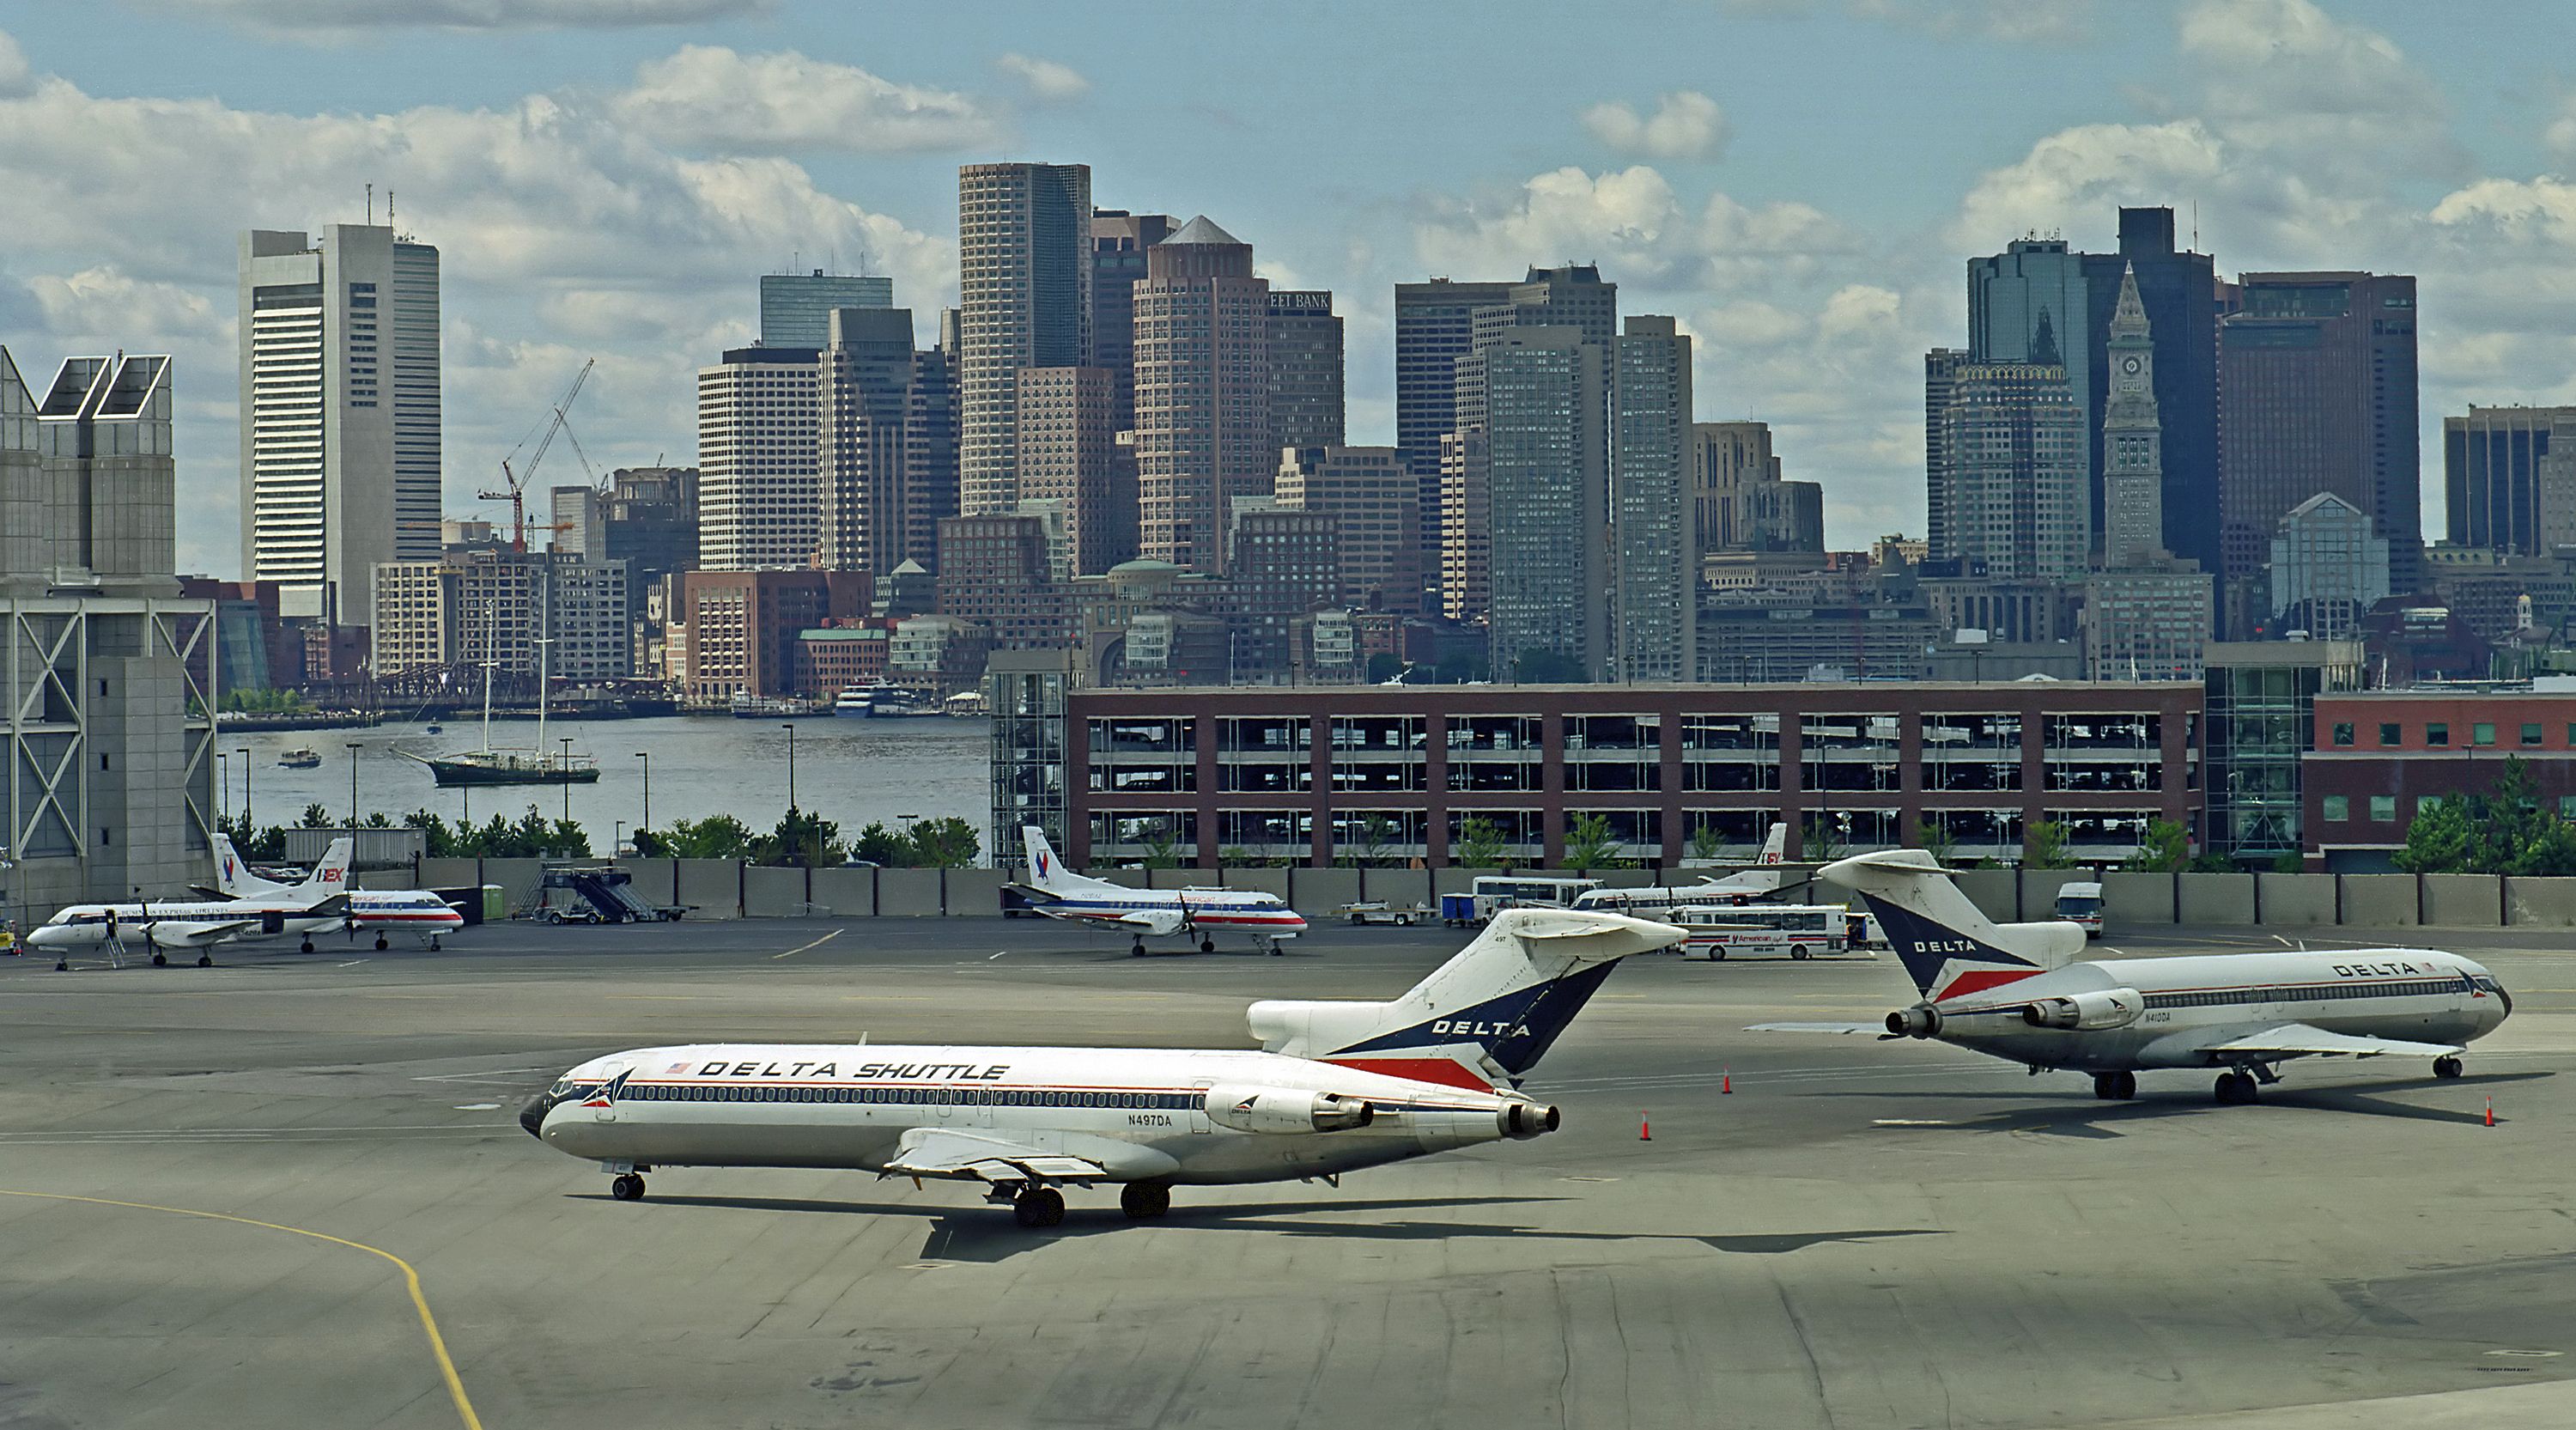 Multiple Delta Air Lines Boeing 727s on an airport apron.